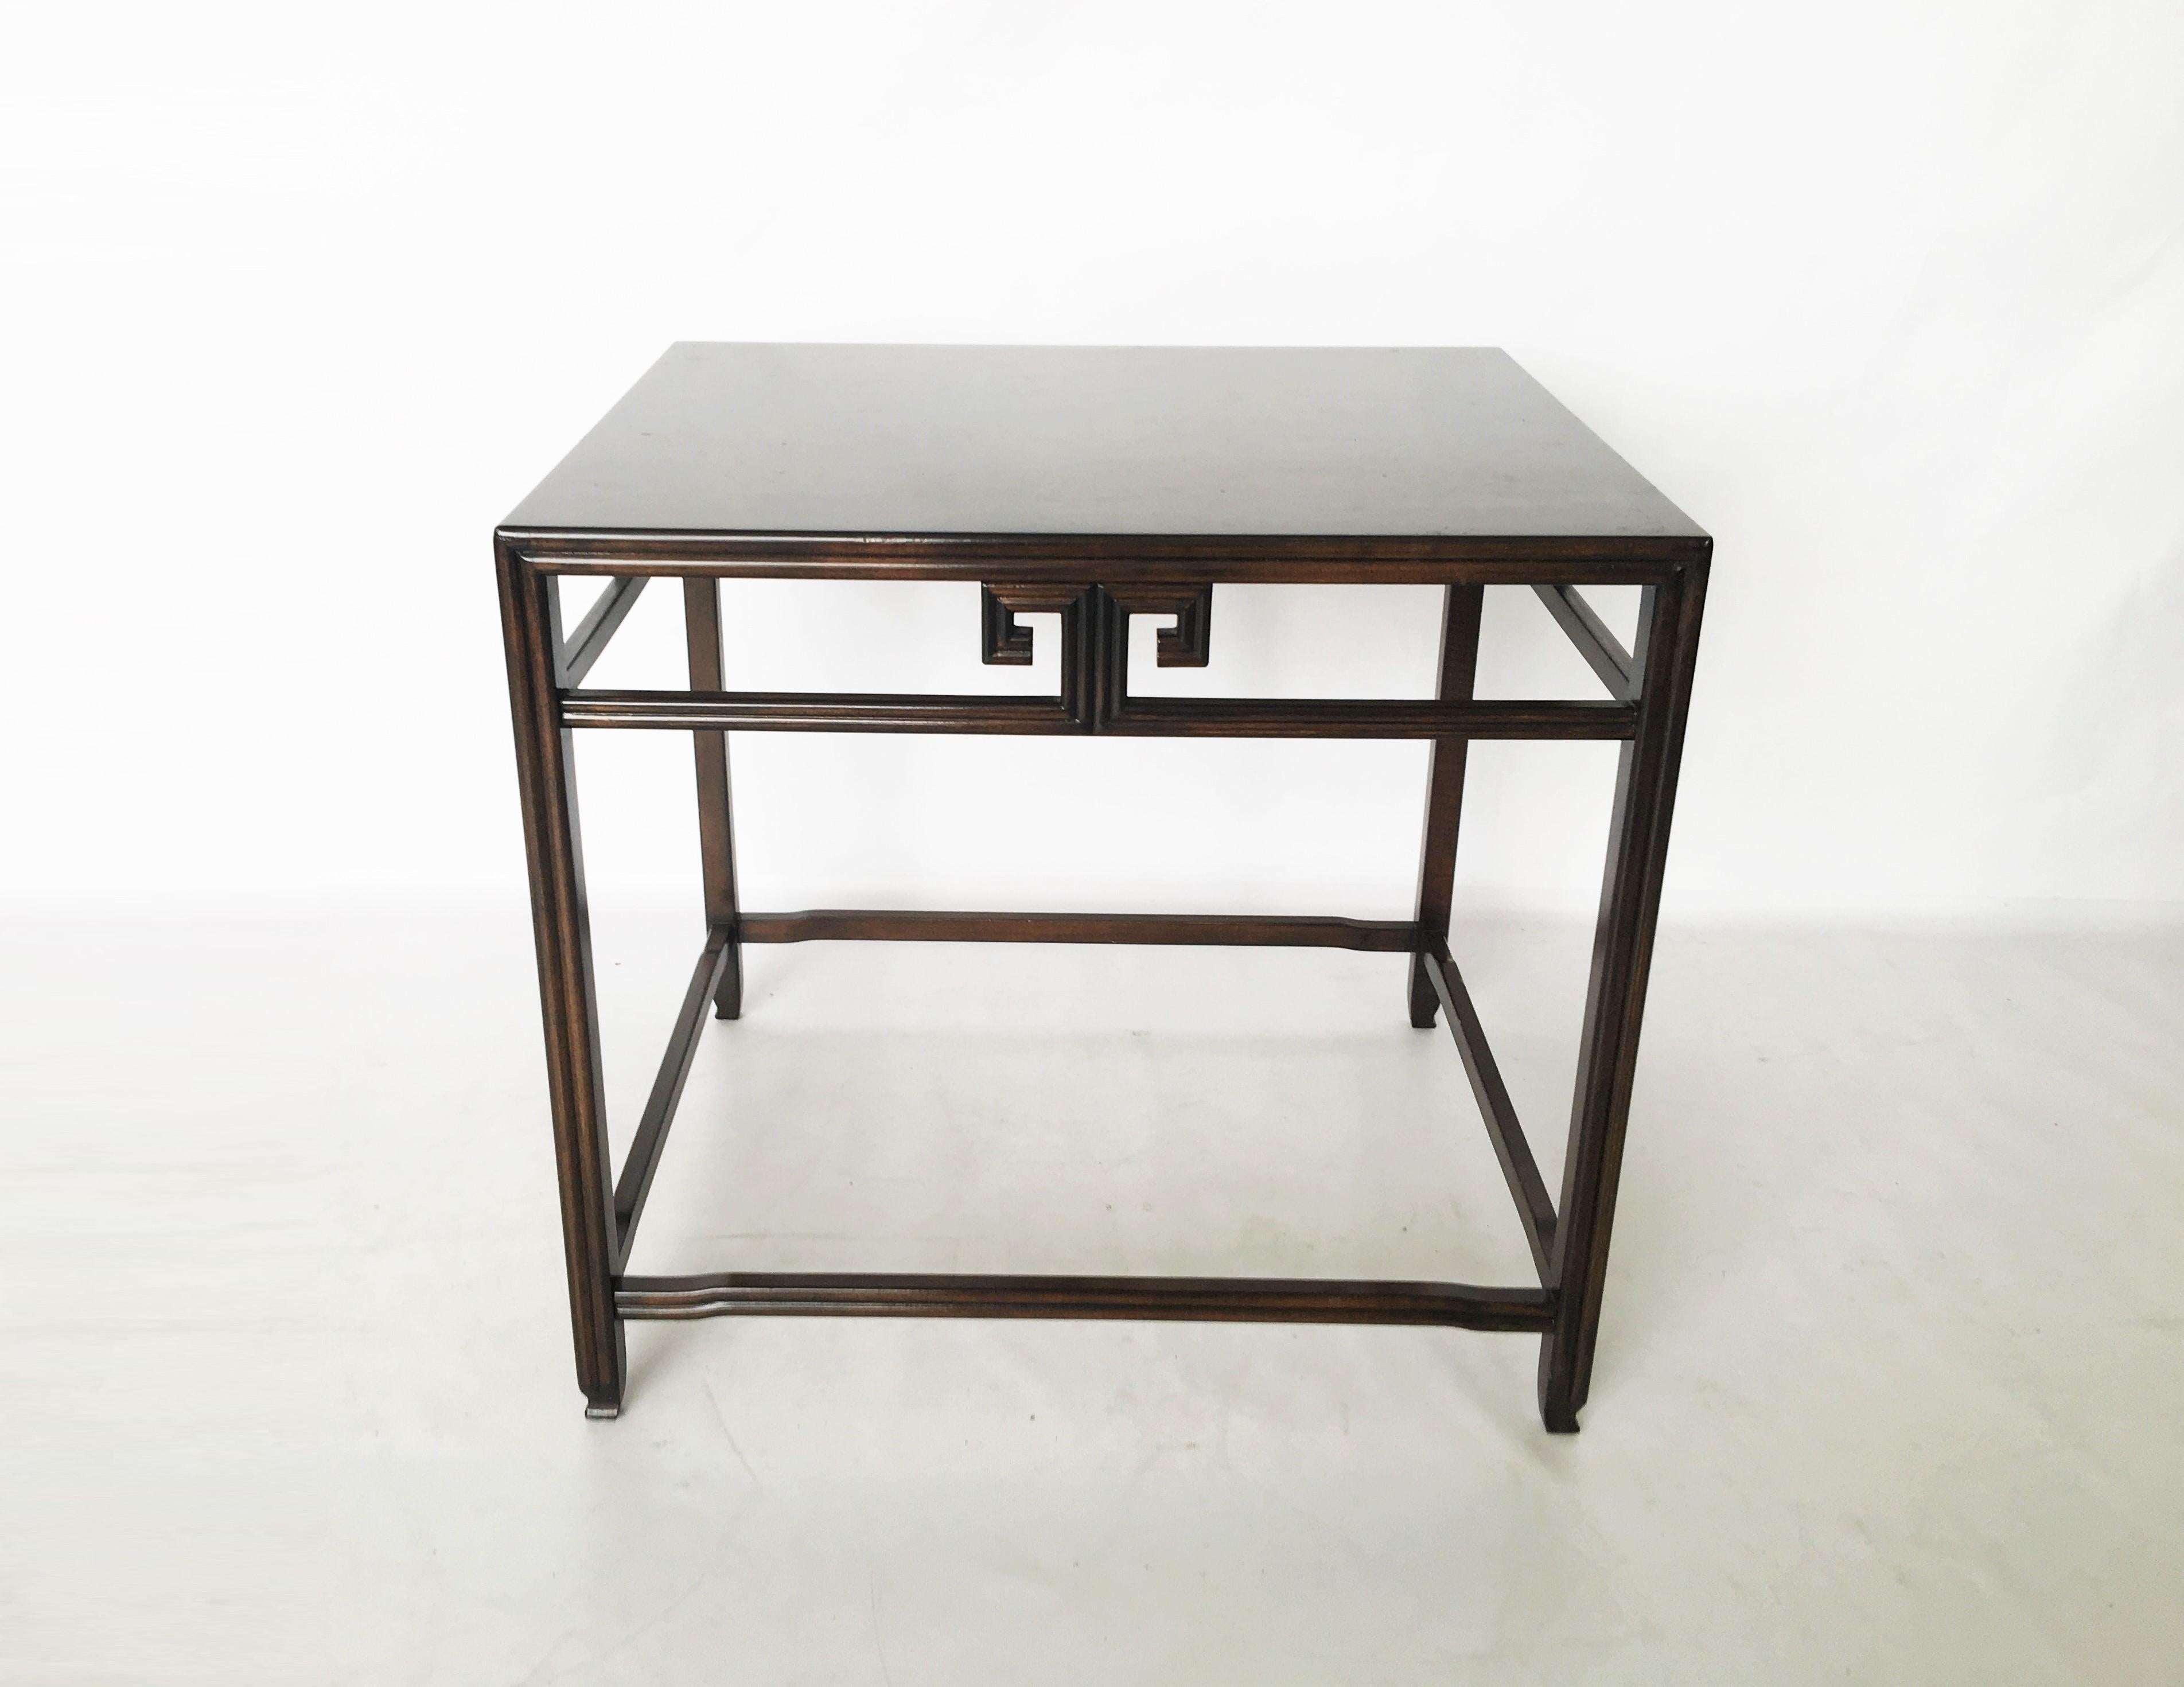 Pair of 1970s side tables by Michael Taylor for Baker from the Far East collection. Solid burl walnut construction with Greek key detailing in an ebonized finish. One table retains Baker metal label.